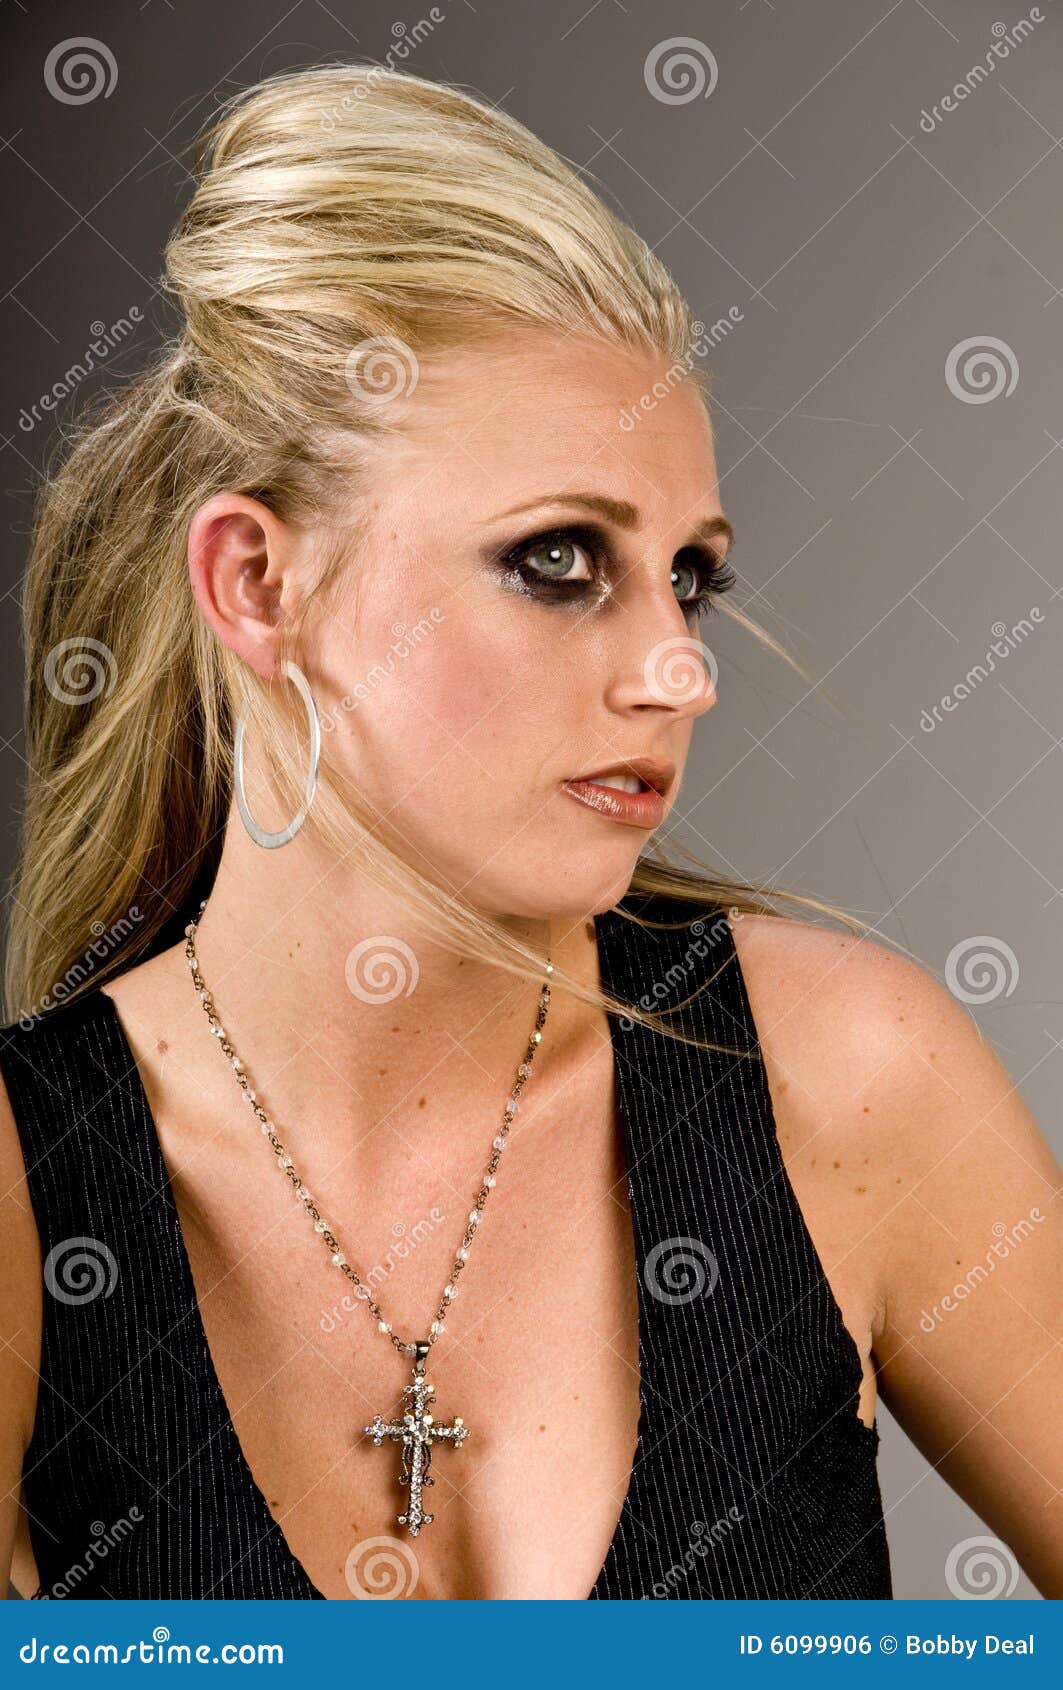 blond with dark edgy makeup